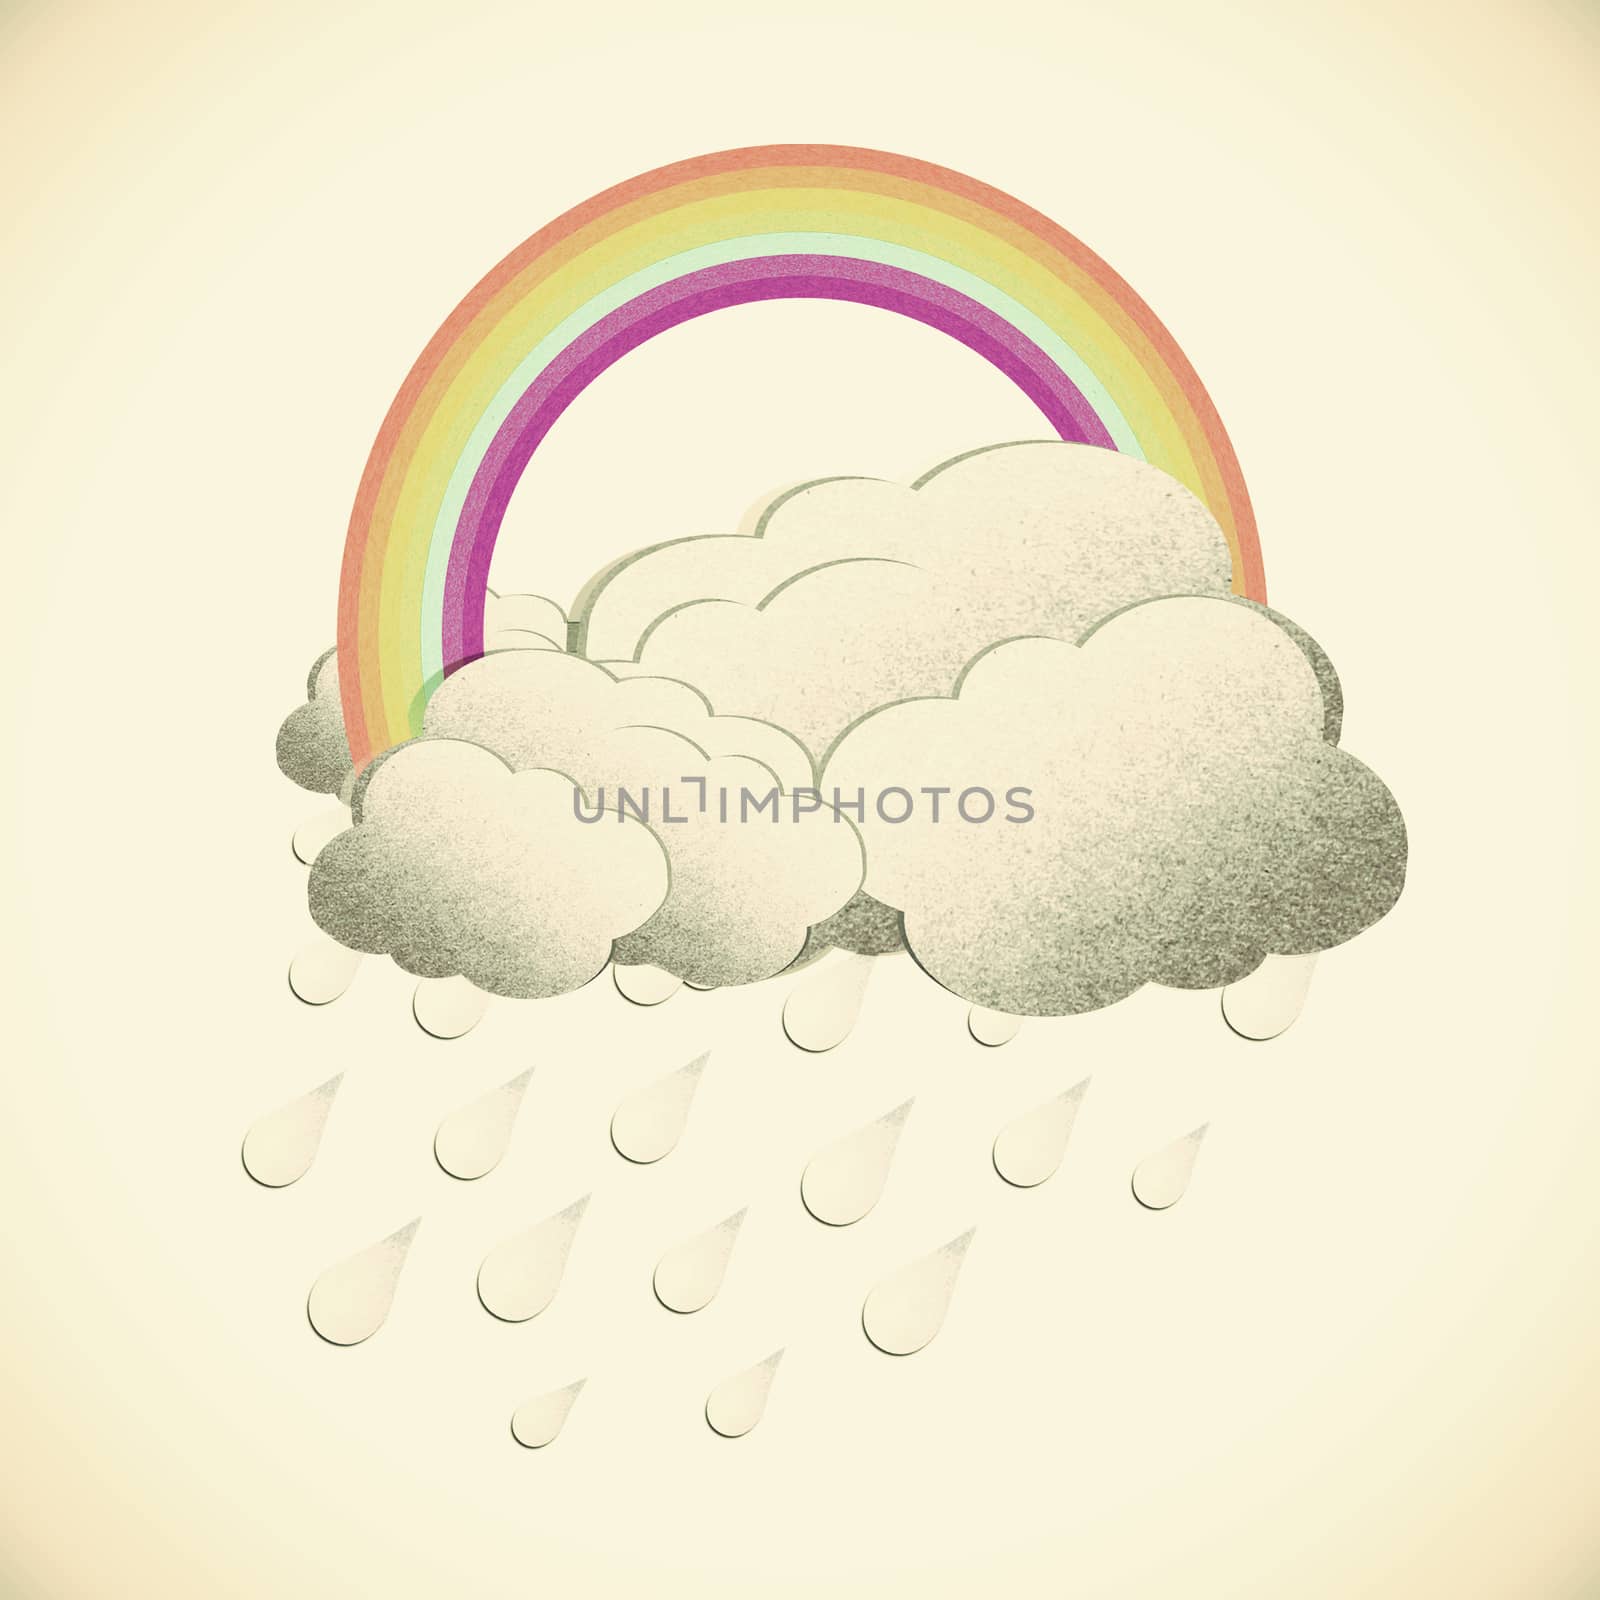  Grunge recycled paper rainbow with rain on vintage tone backgro by jakgree